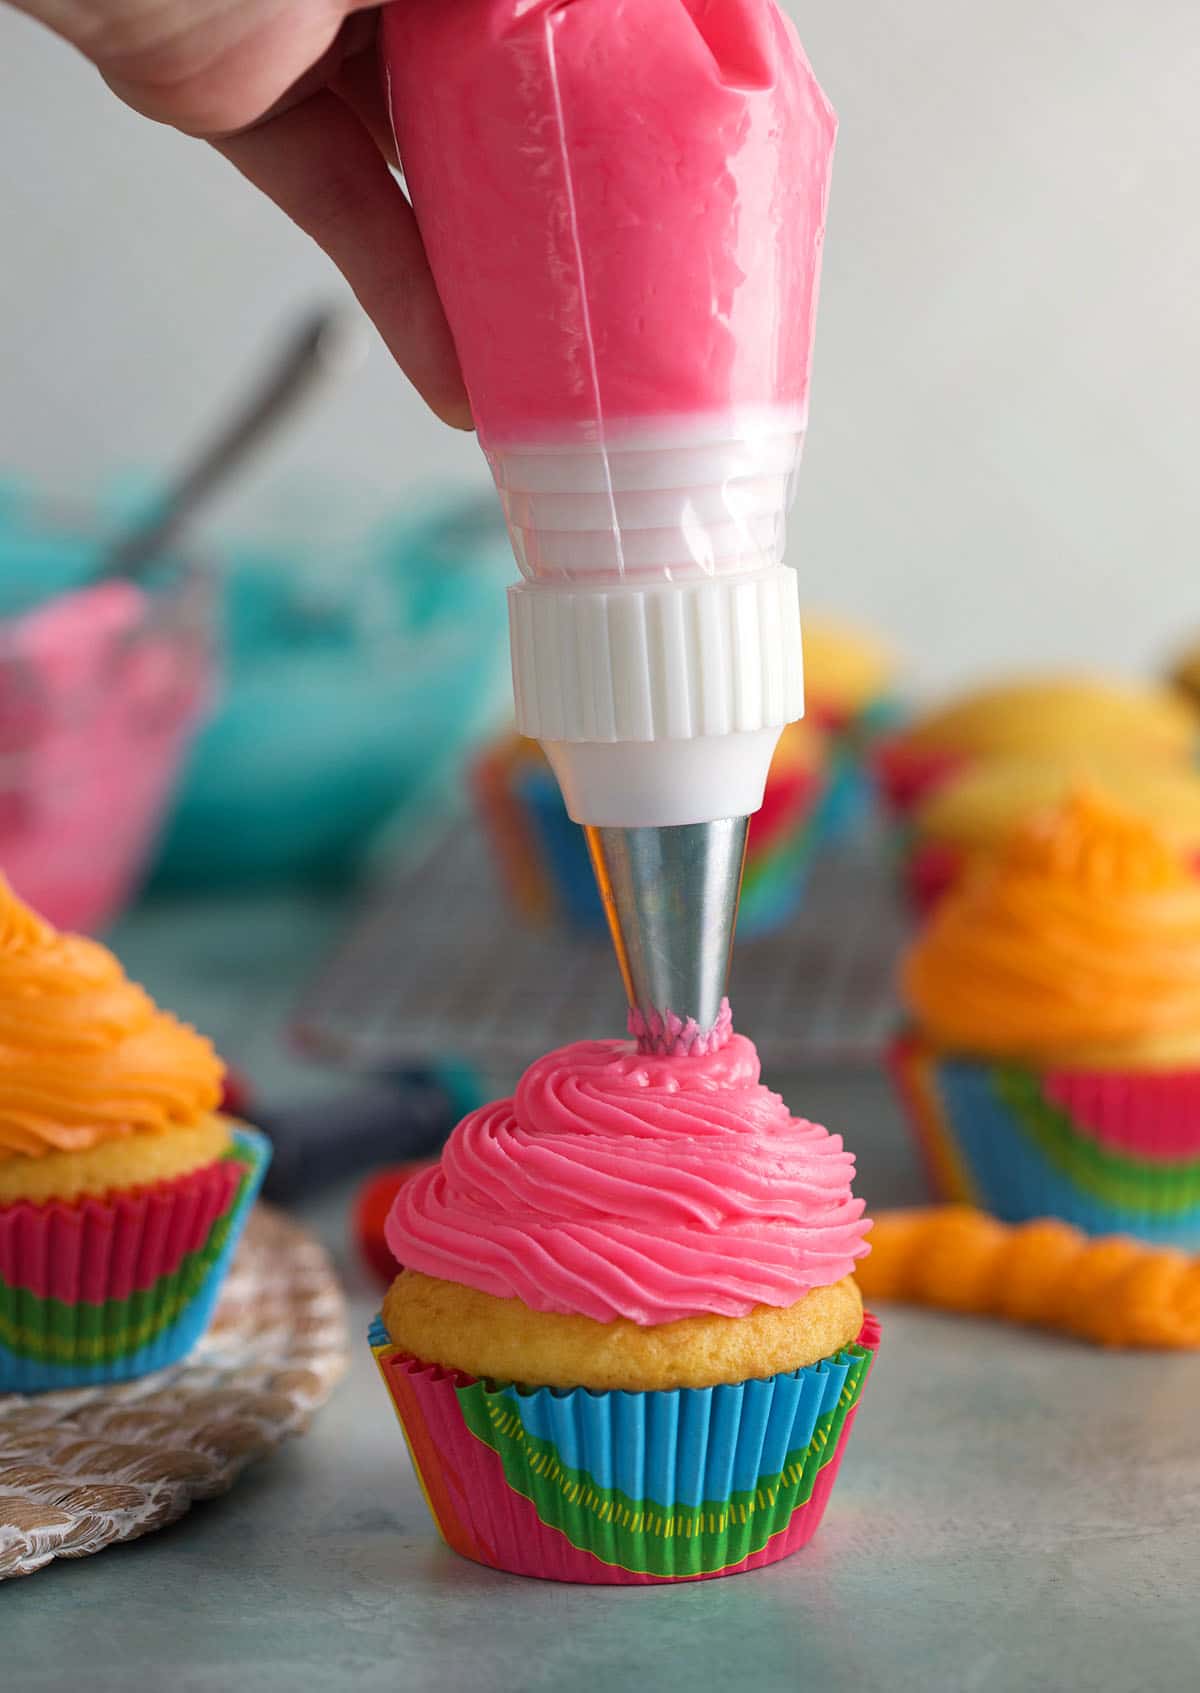 A piping bag is piping pink frosting onto a vanilla cupcake.